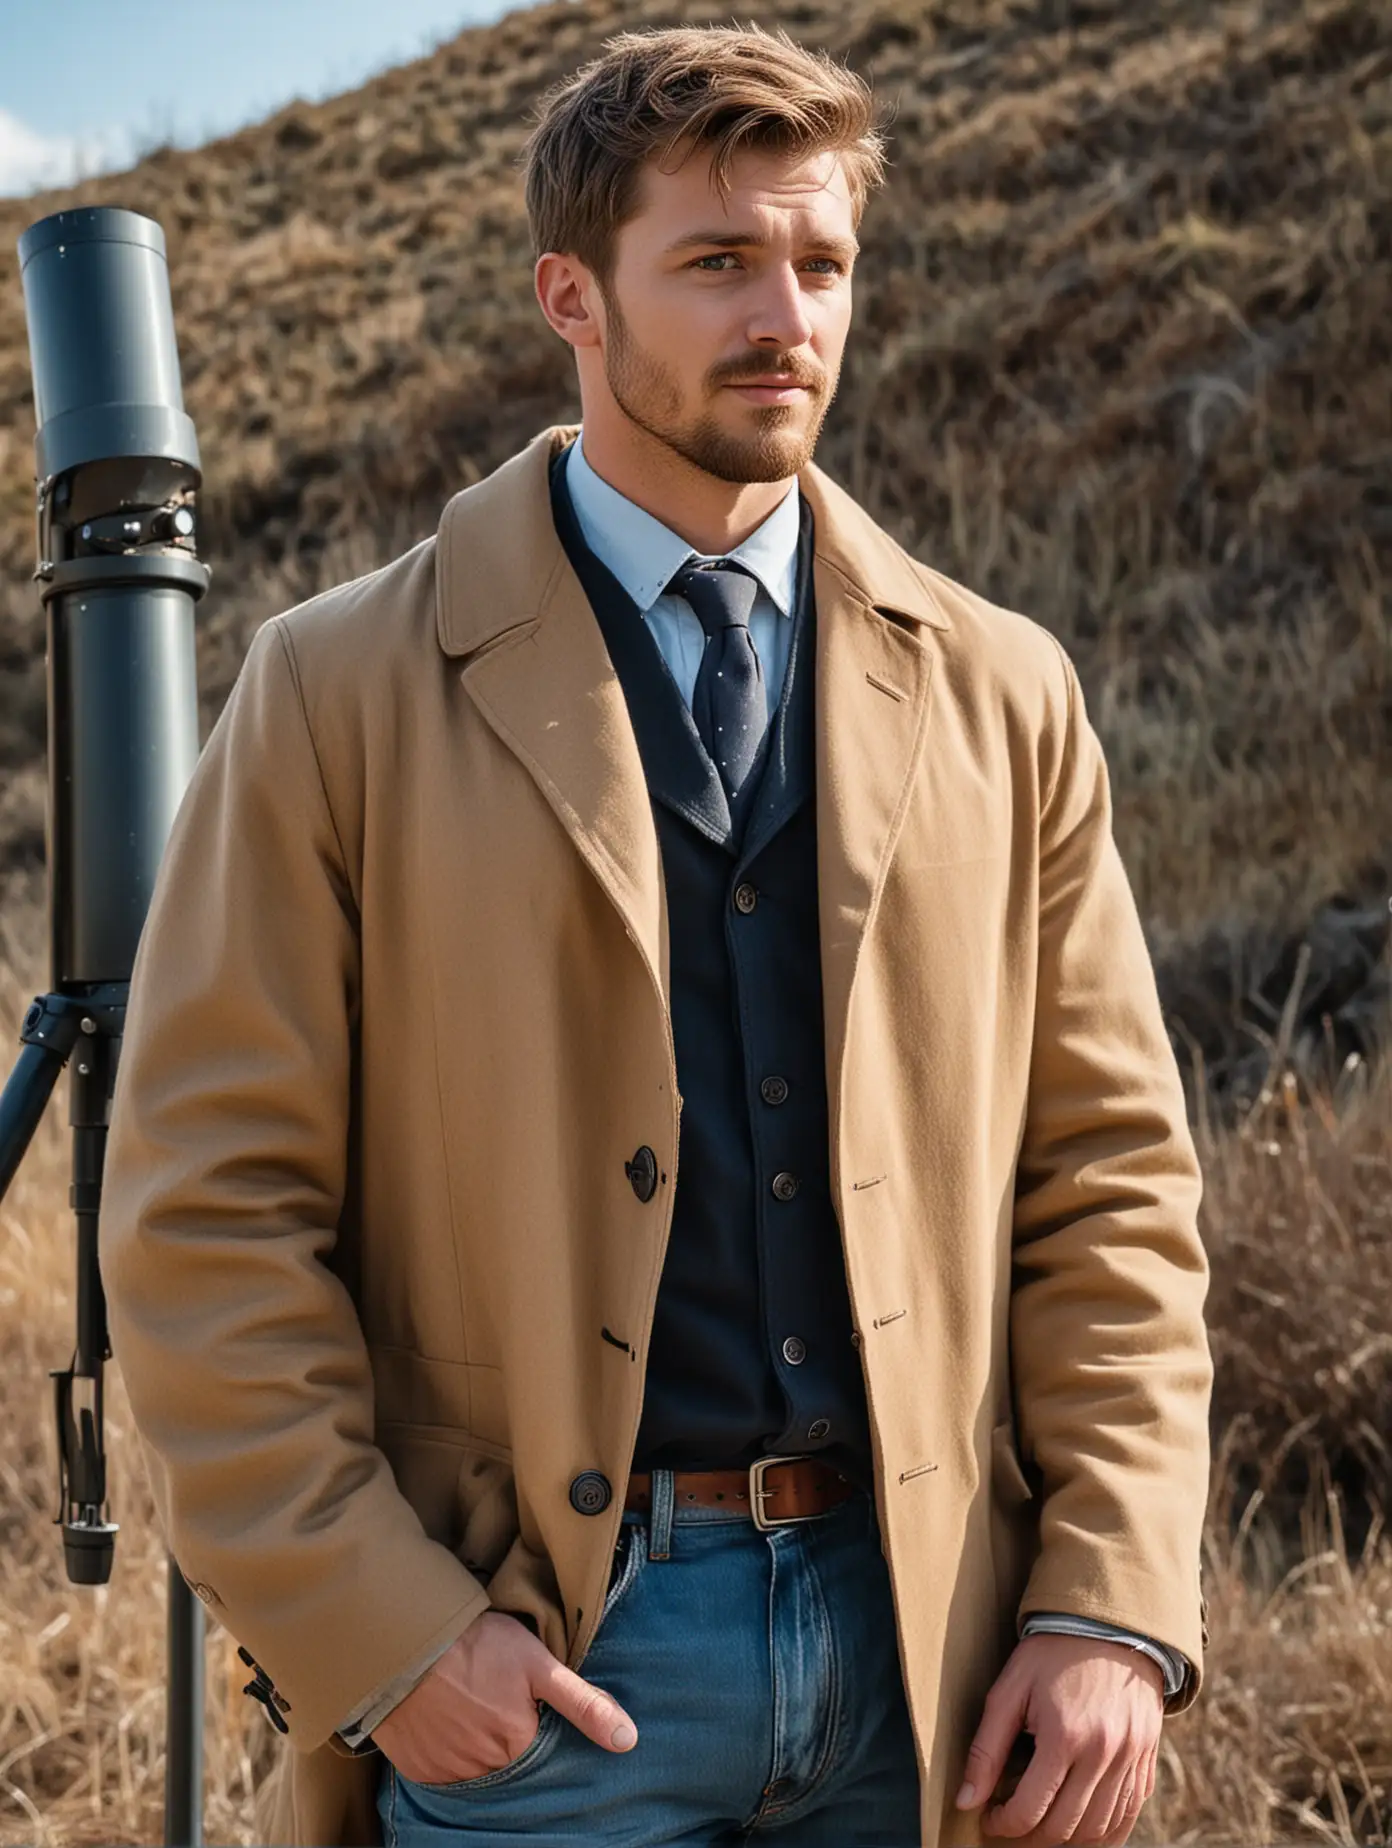 A man in his early 30s stands outside next to a telescope.  Average height and average weight, slightly stocky, with short brown hair, light brown beard, blue eyes and slightly tan skin.  He is wearing dark jeans, black button down shirt, blue tie, and a dark great coat.